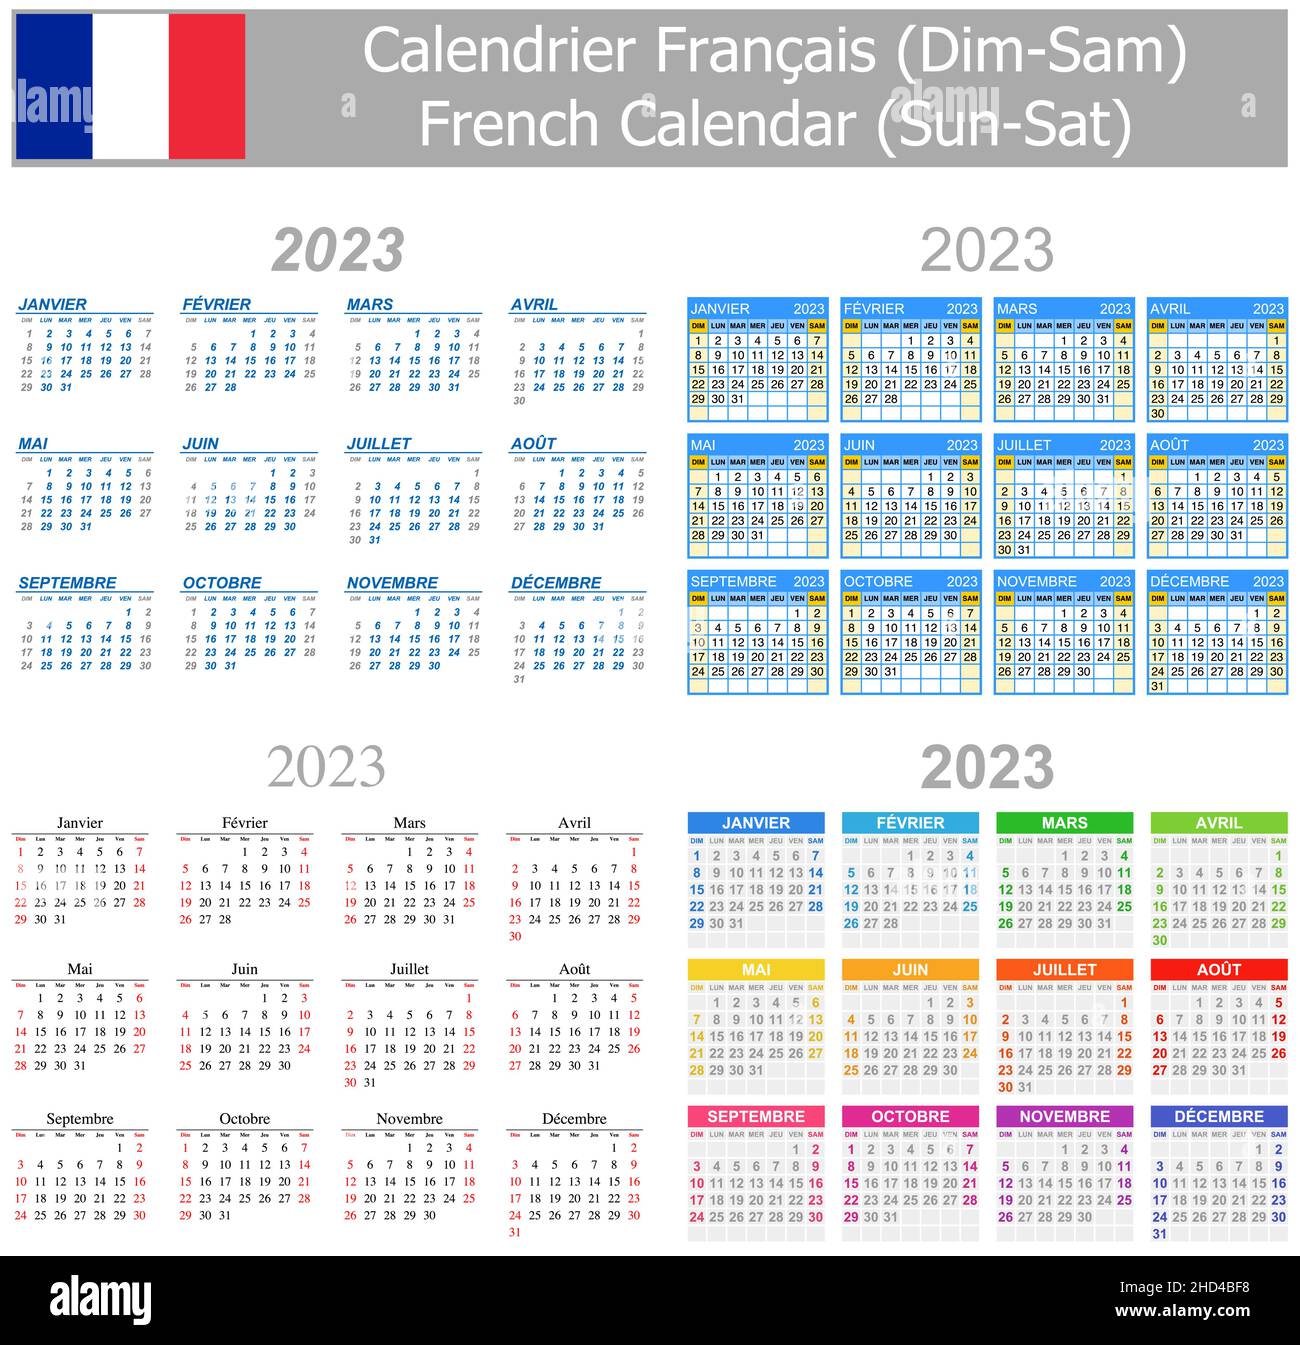 882 Agenda French Images, Stock Photos, 3D objects, & Vectors